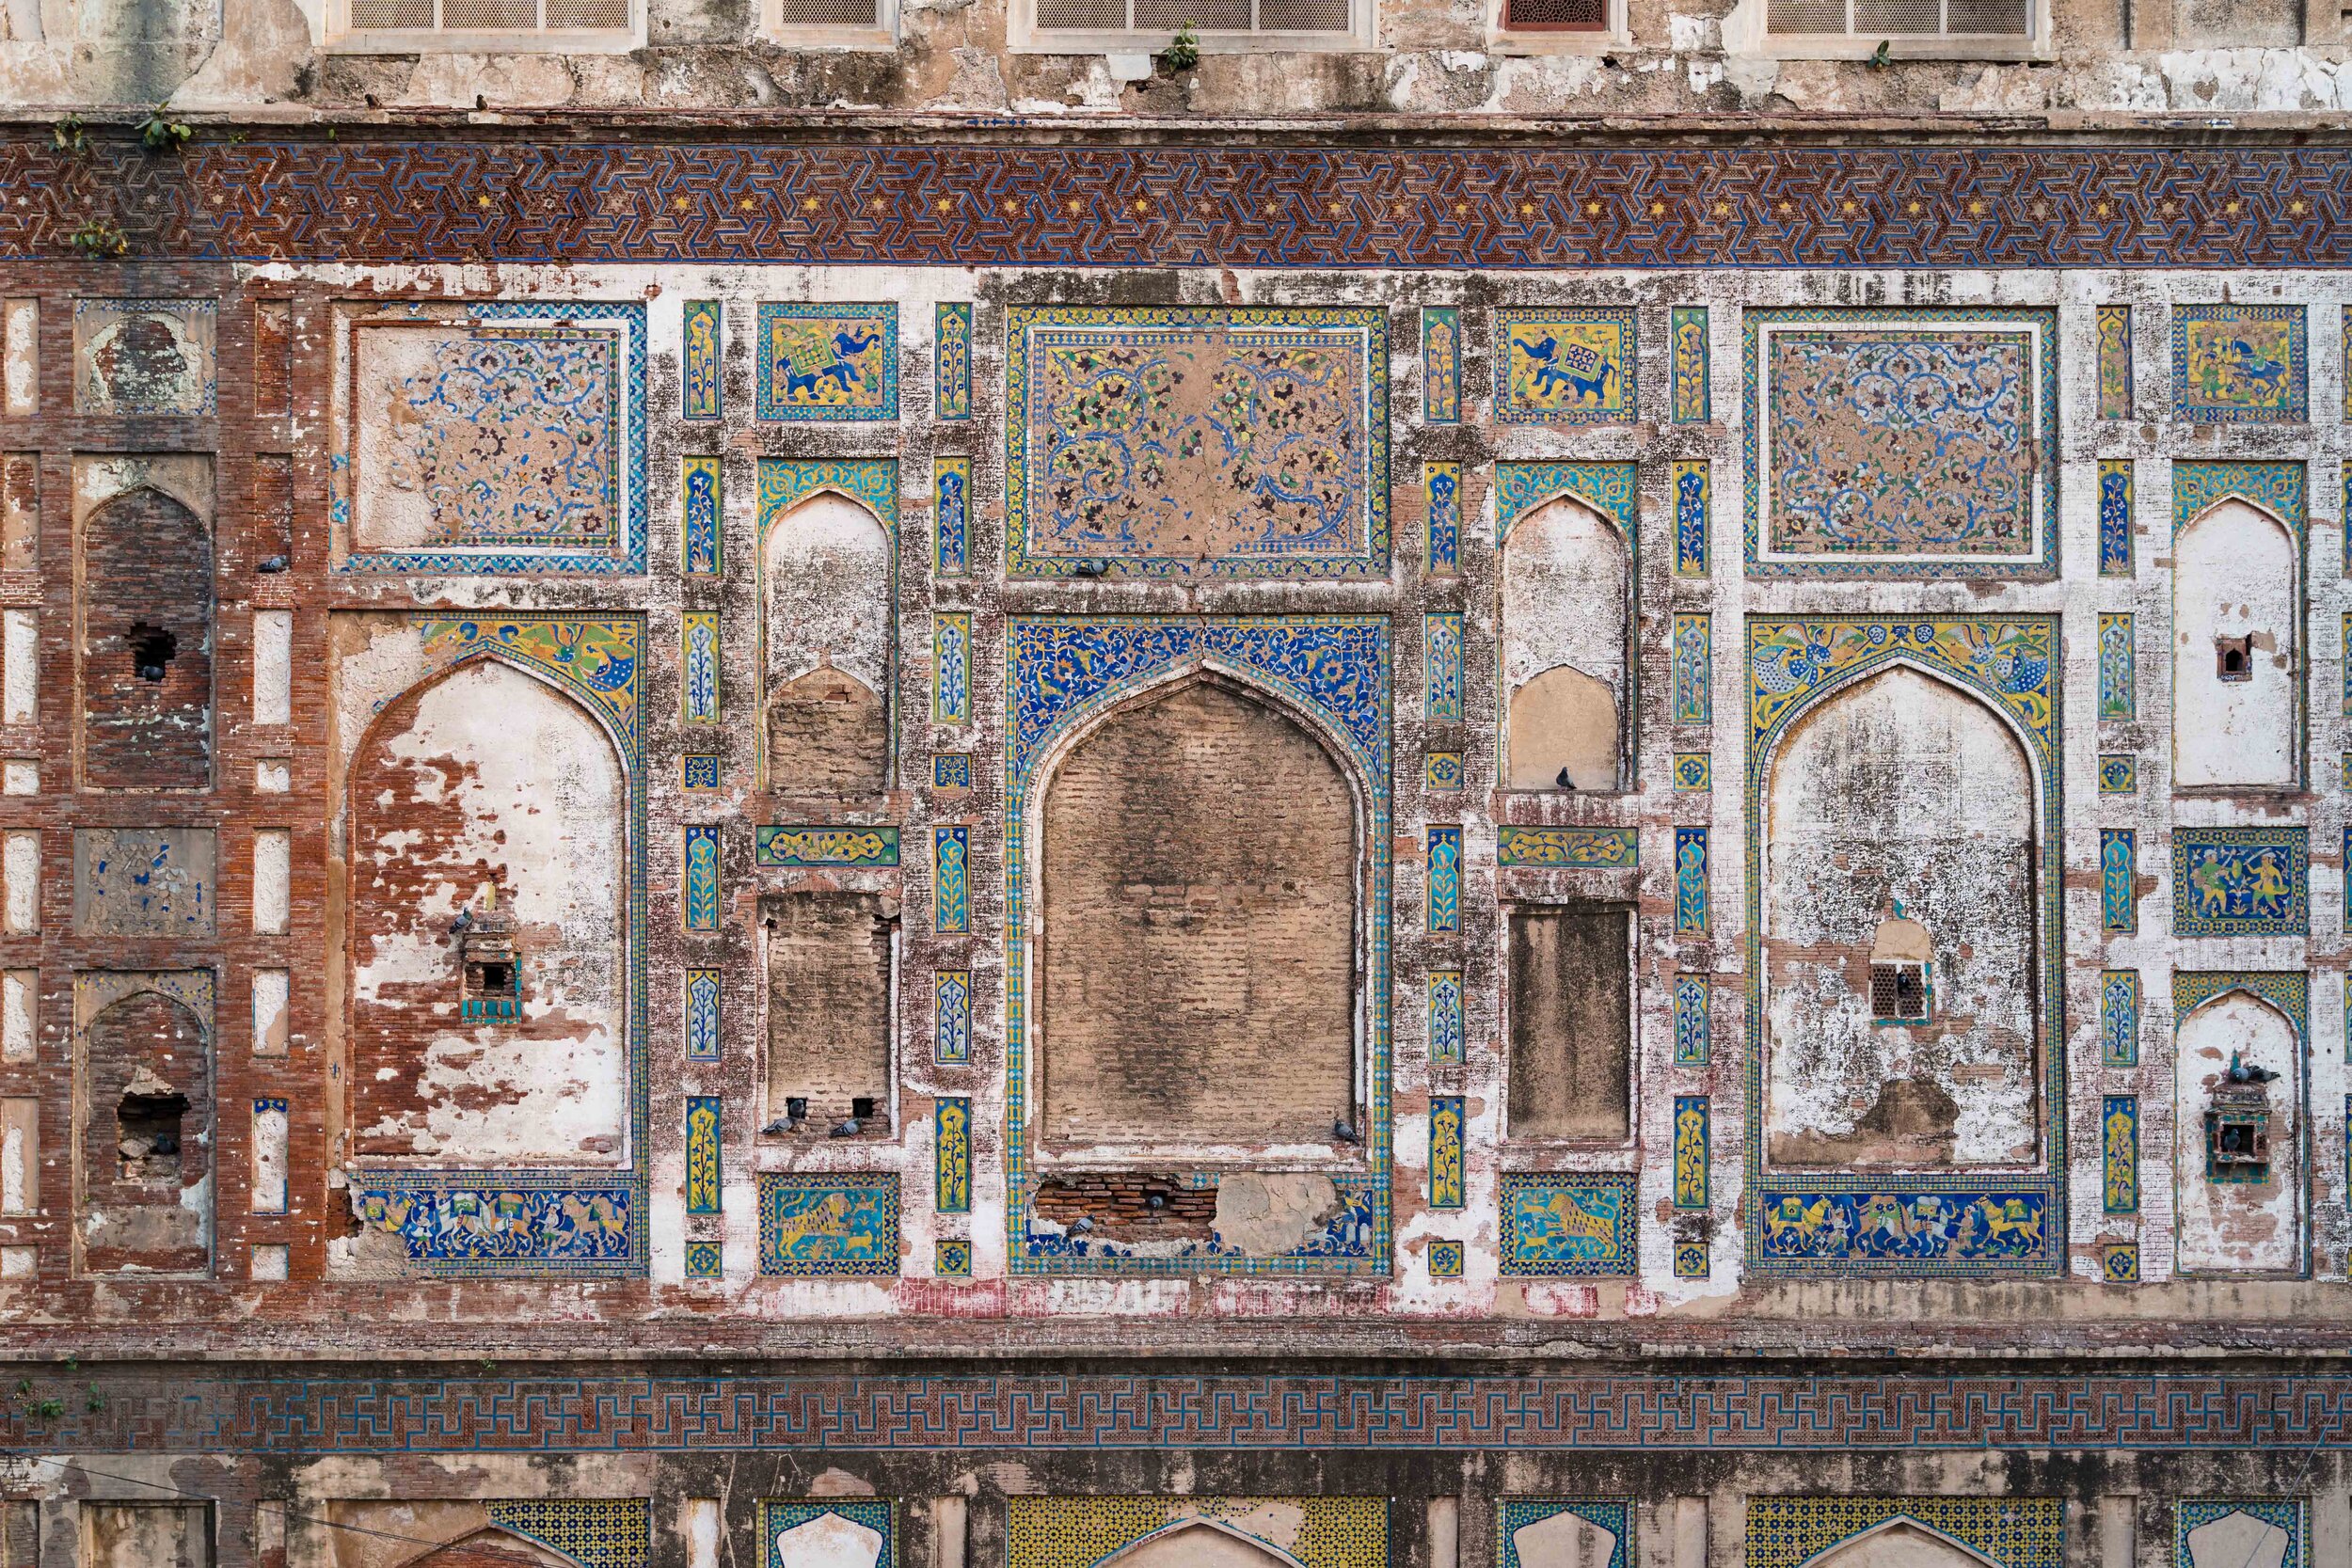 The Picture Wall inside the Lahore Fort